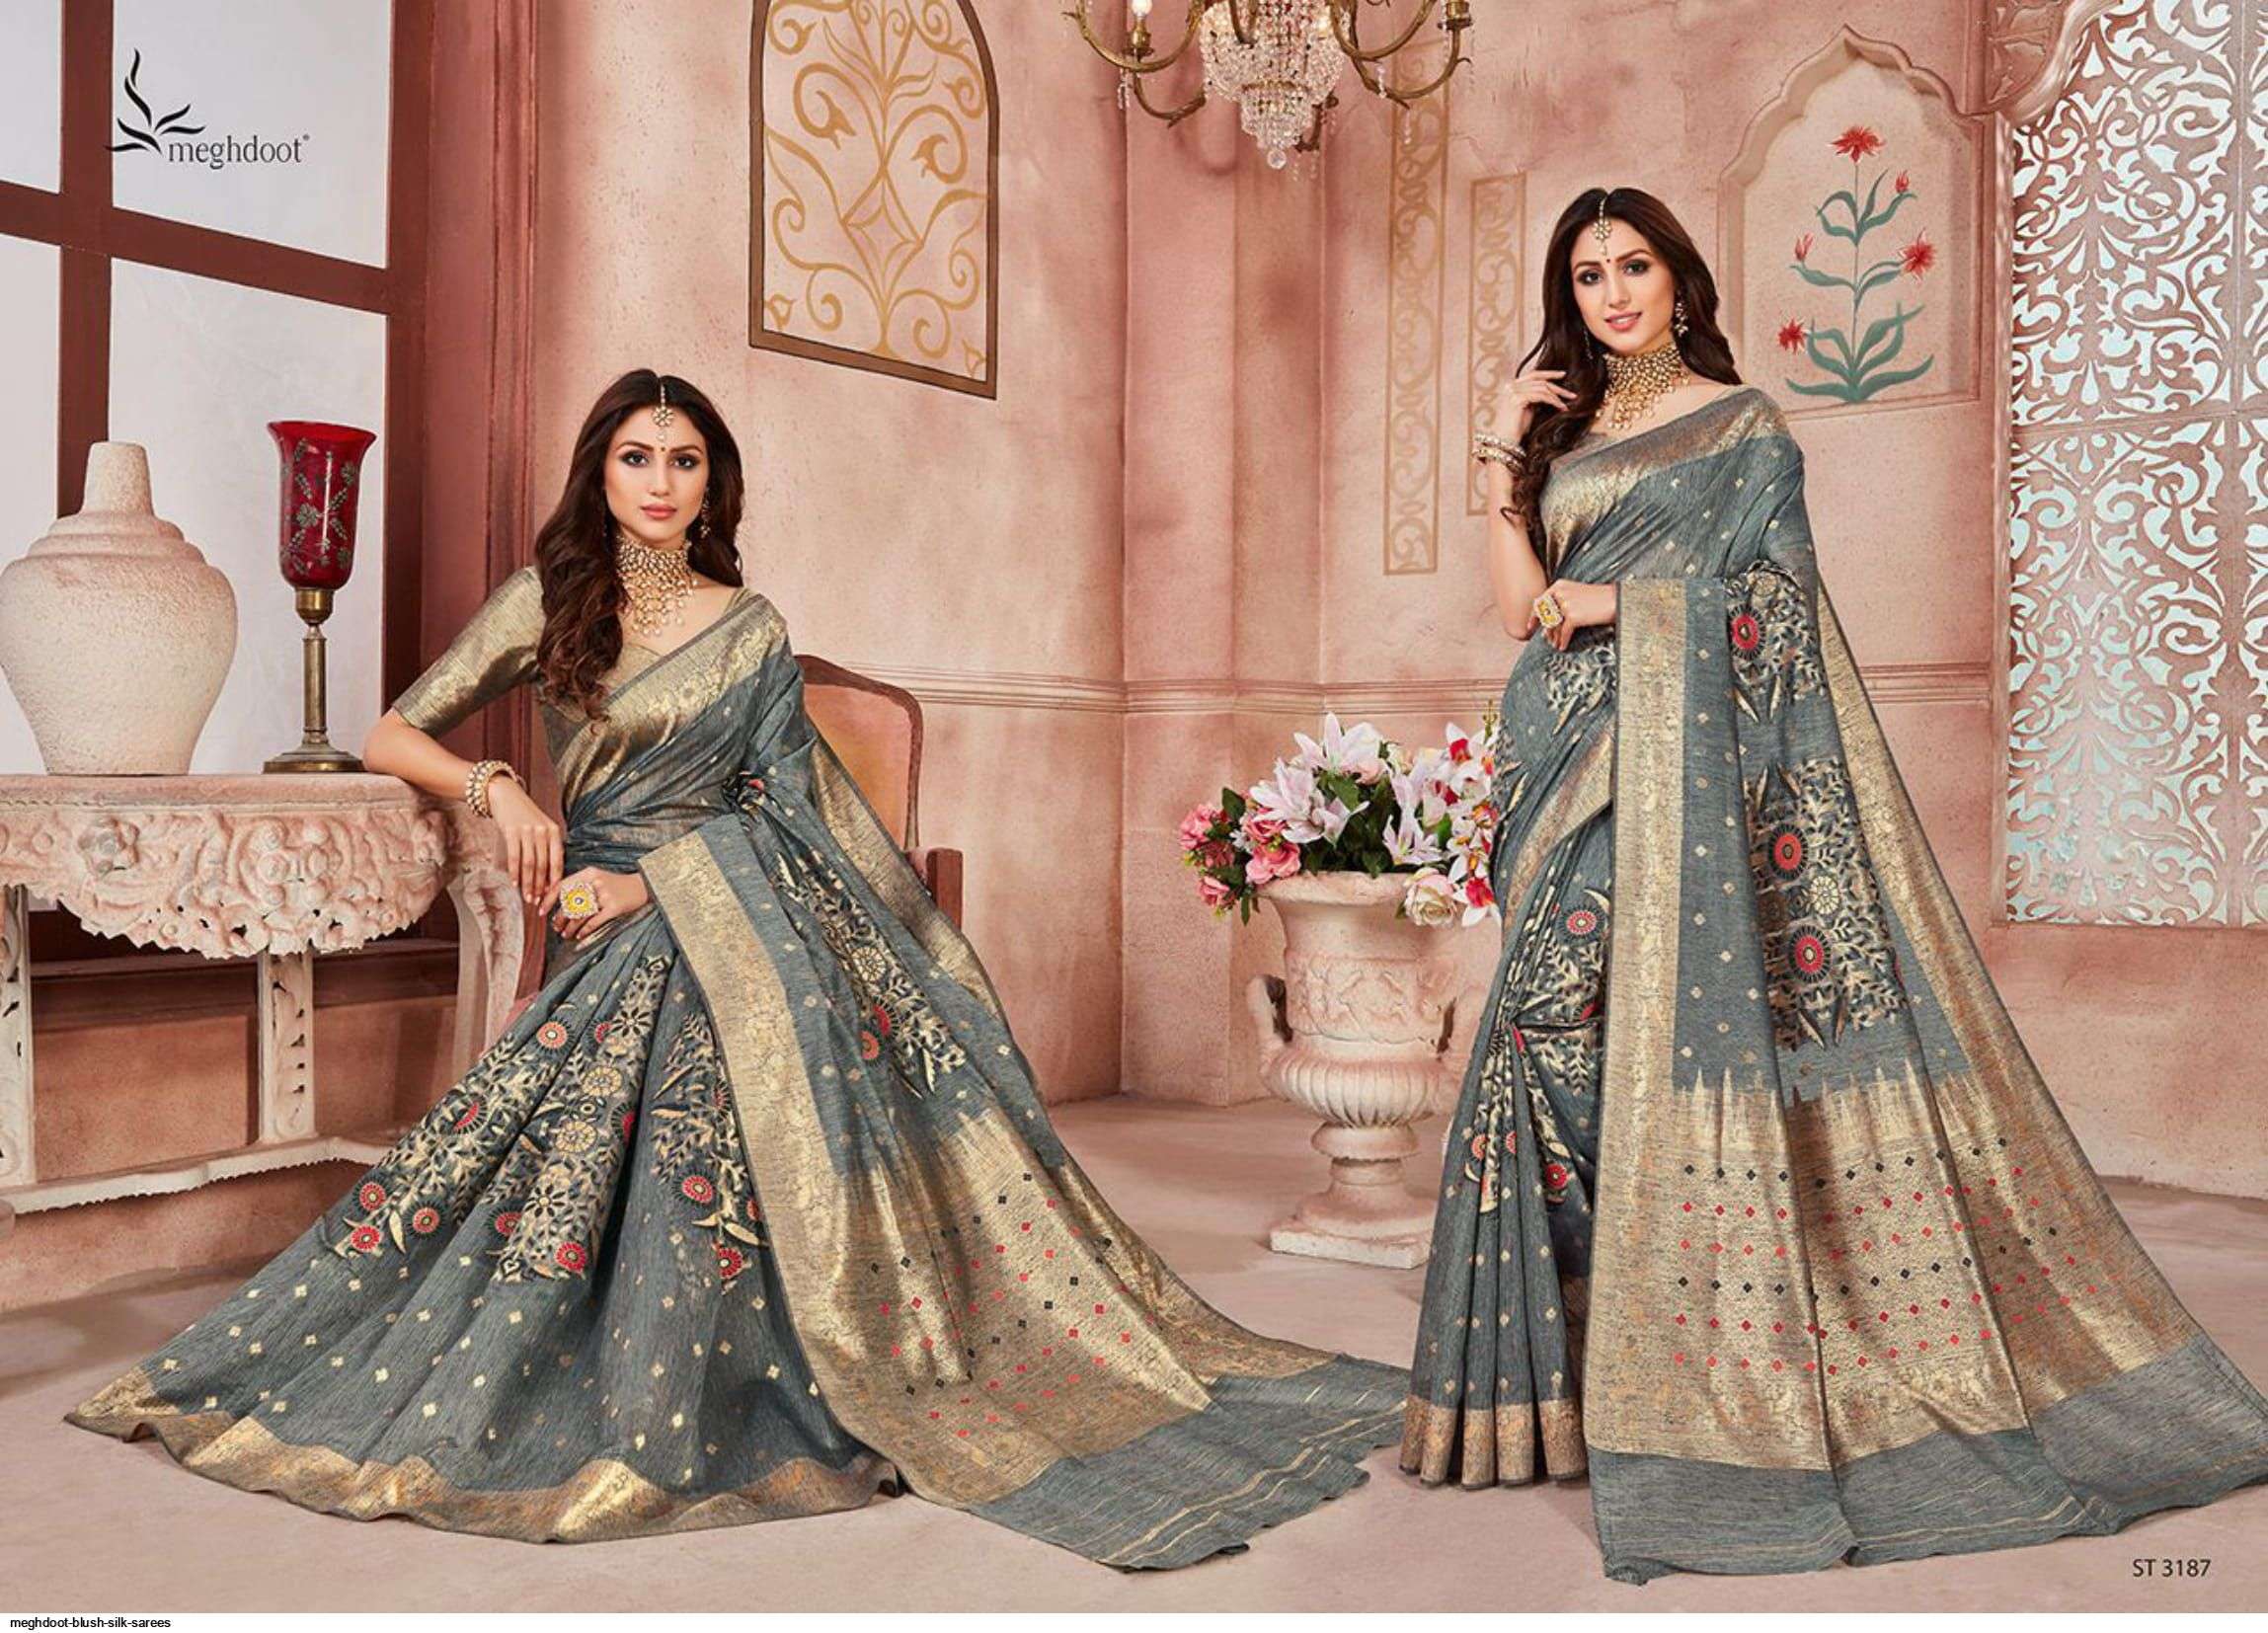 BLUSH BY MOGHDOOT INDIAN TRADITIONAL WEAR COLLECTION BEAUTIFUL STYLISH FANCY COLORFUL PARTY WEAR & OCCASIONAL WEAR JUTE SILK SAREES AT WHOLESALE PRICE